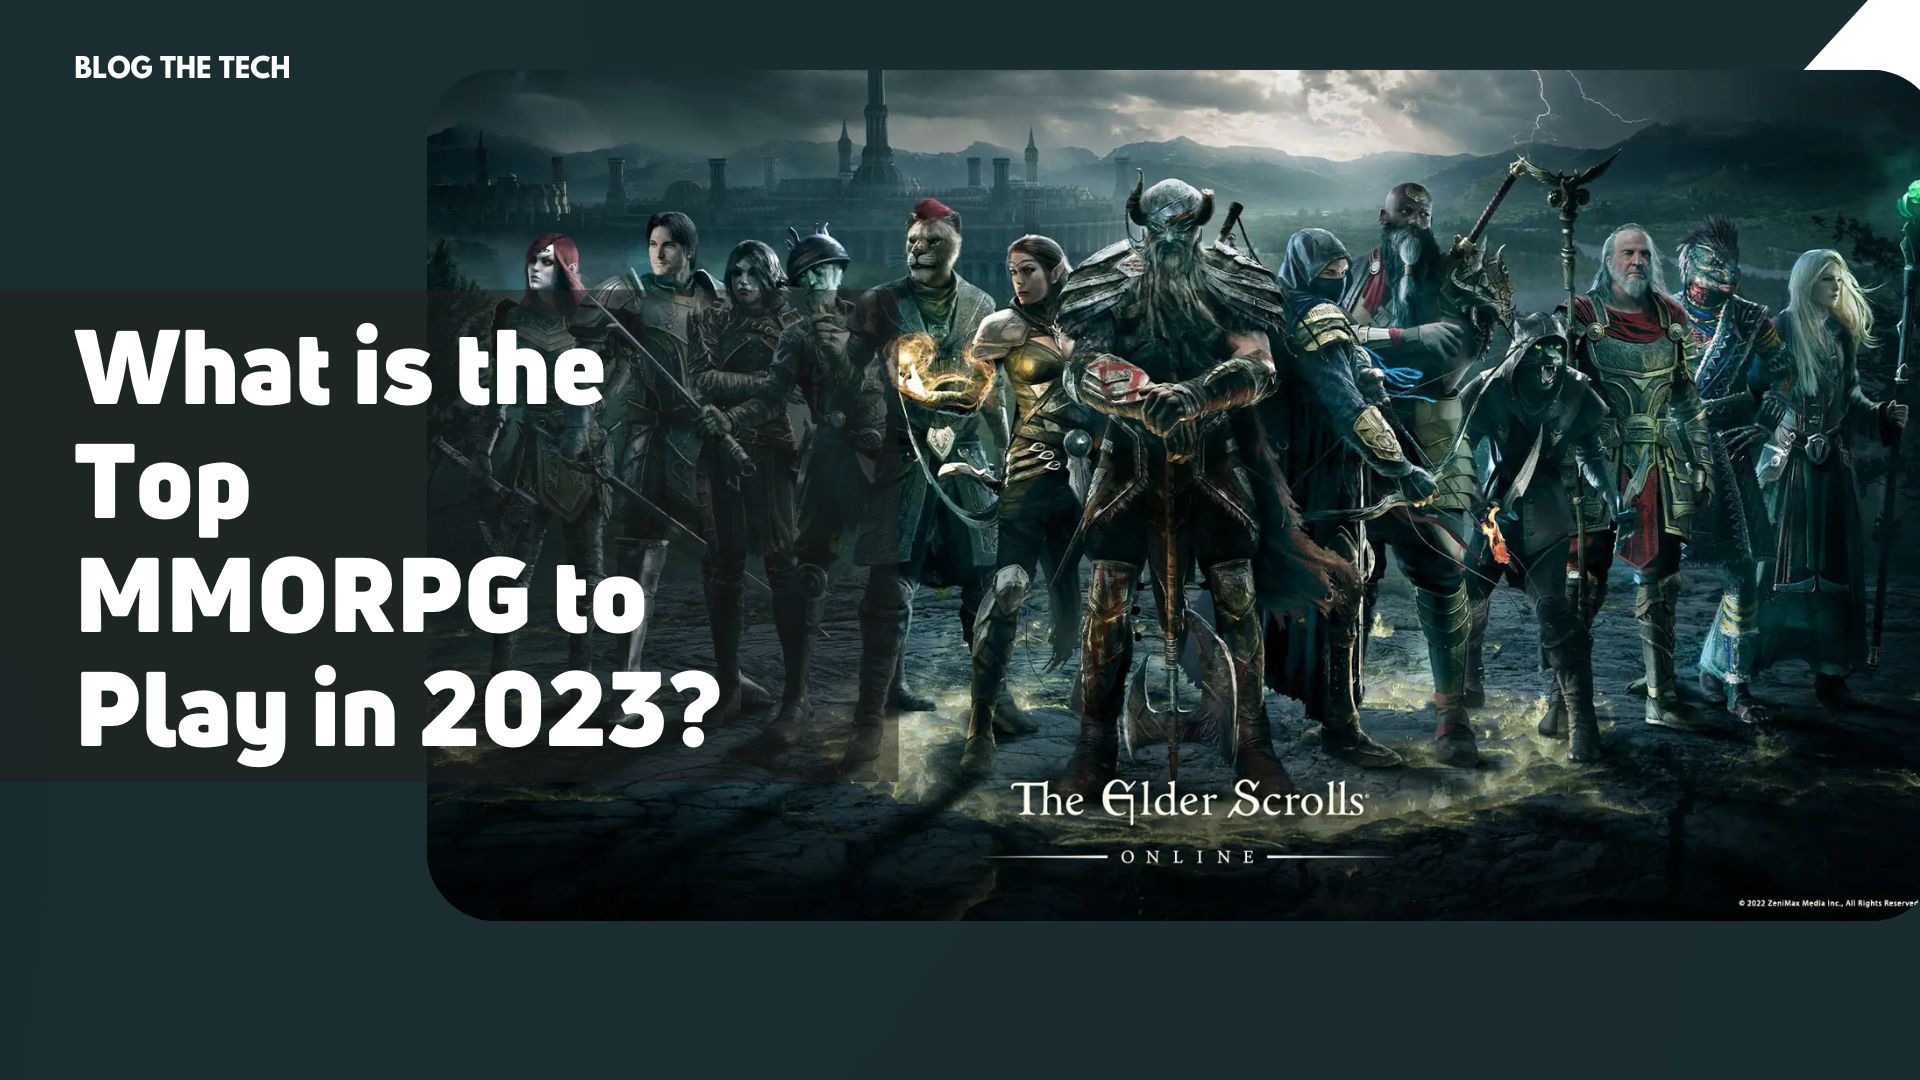 What is the Top MMORPG to Play in 2023?